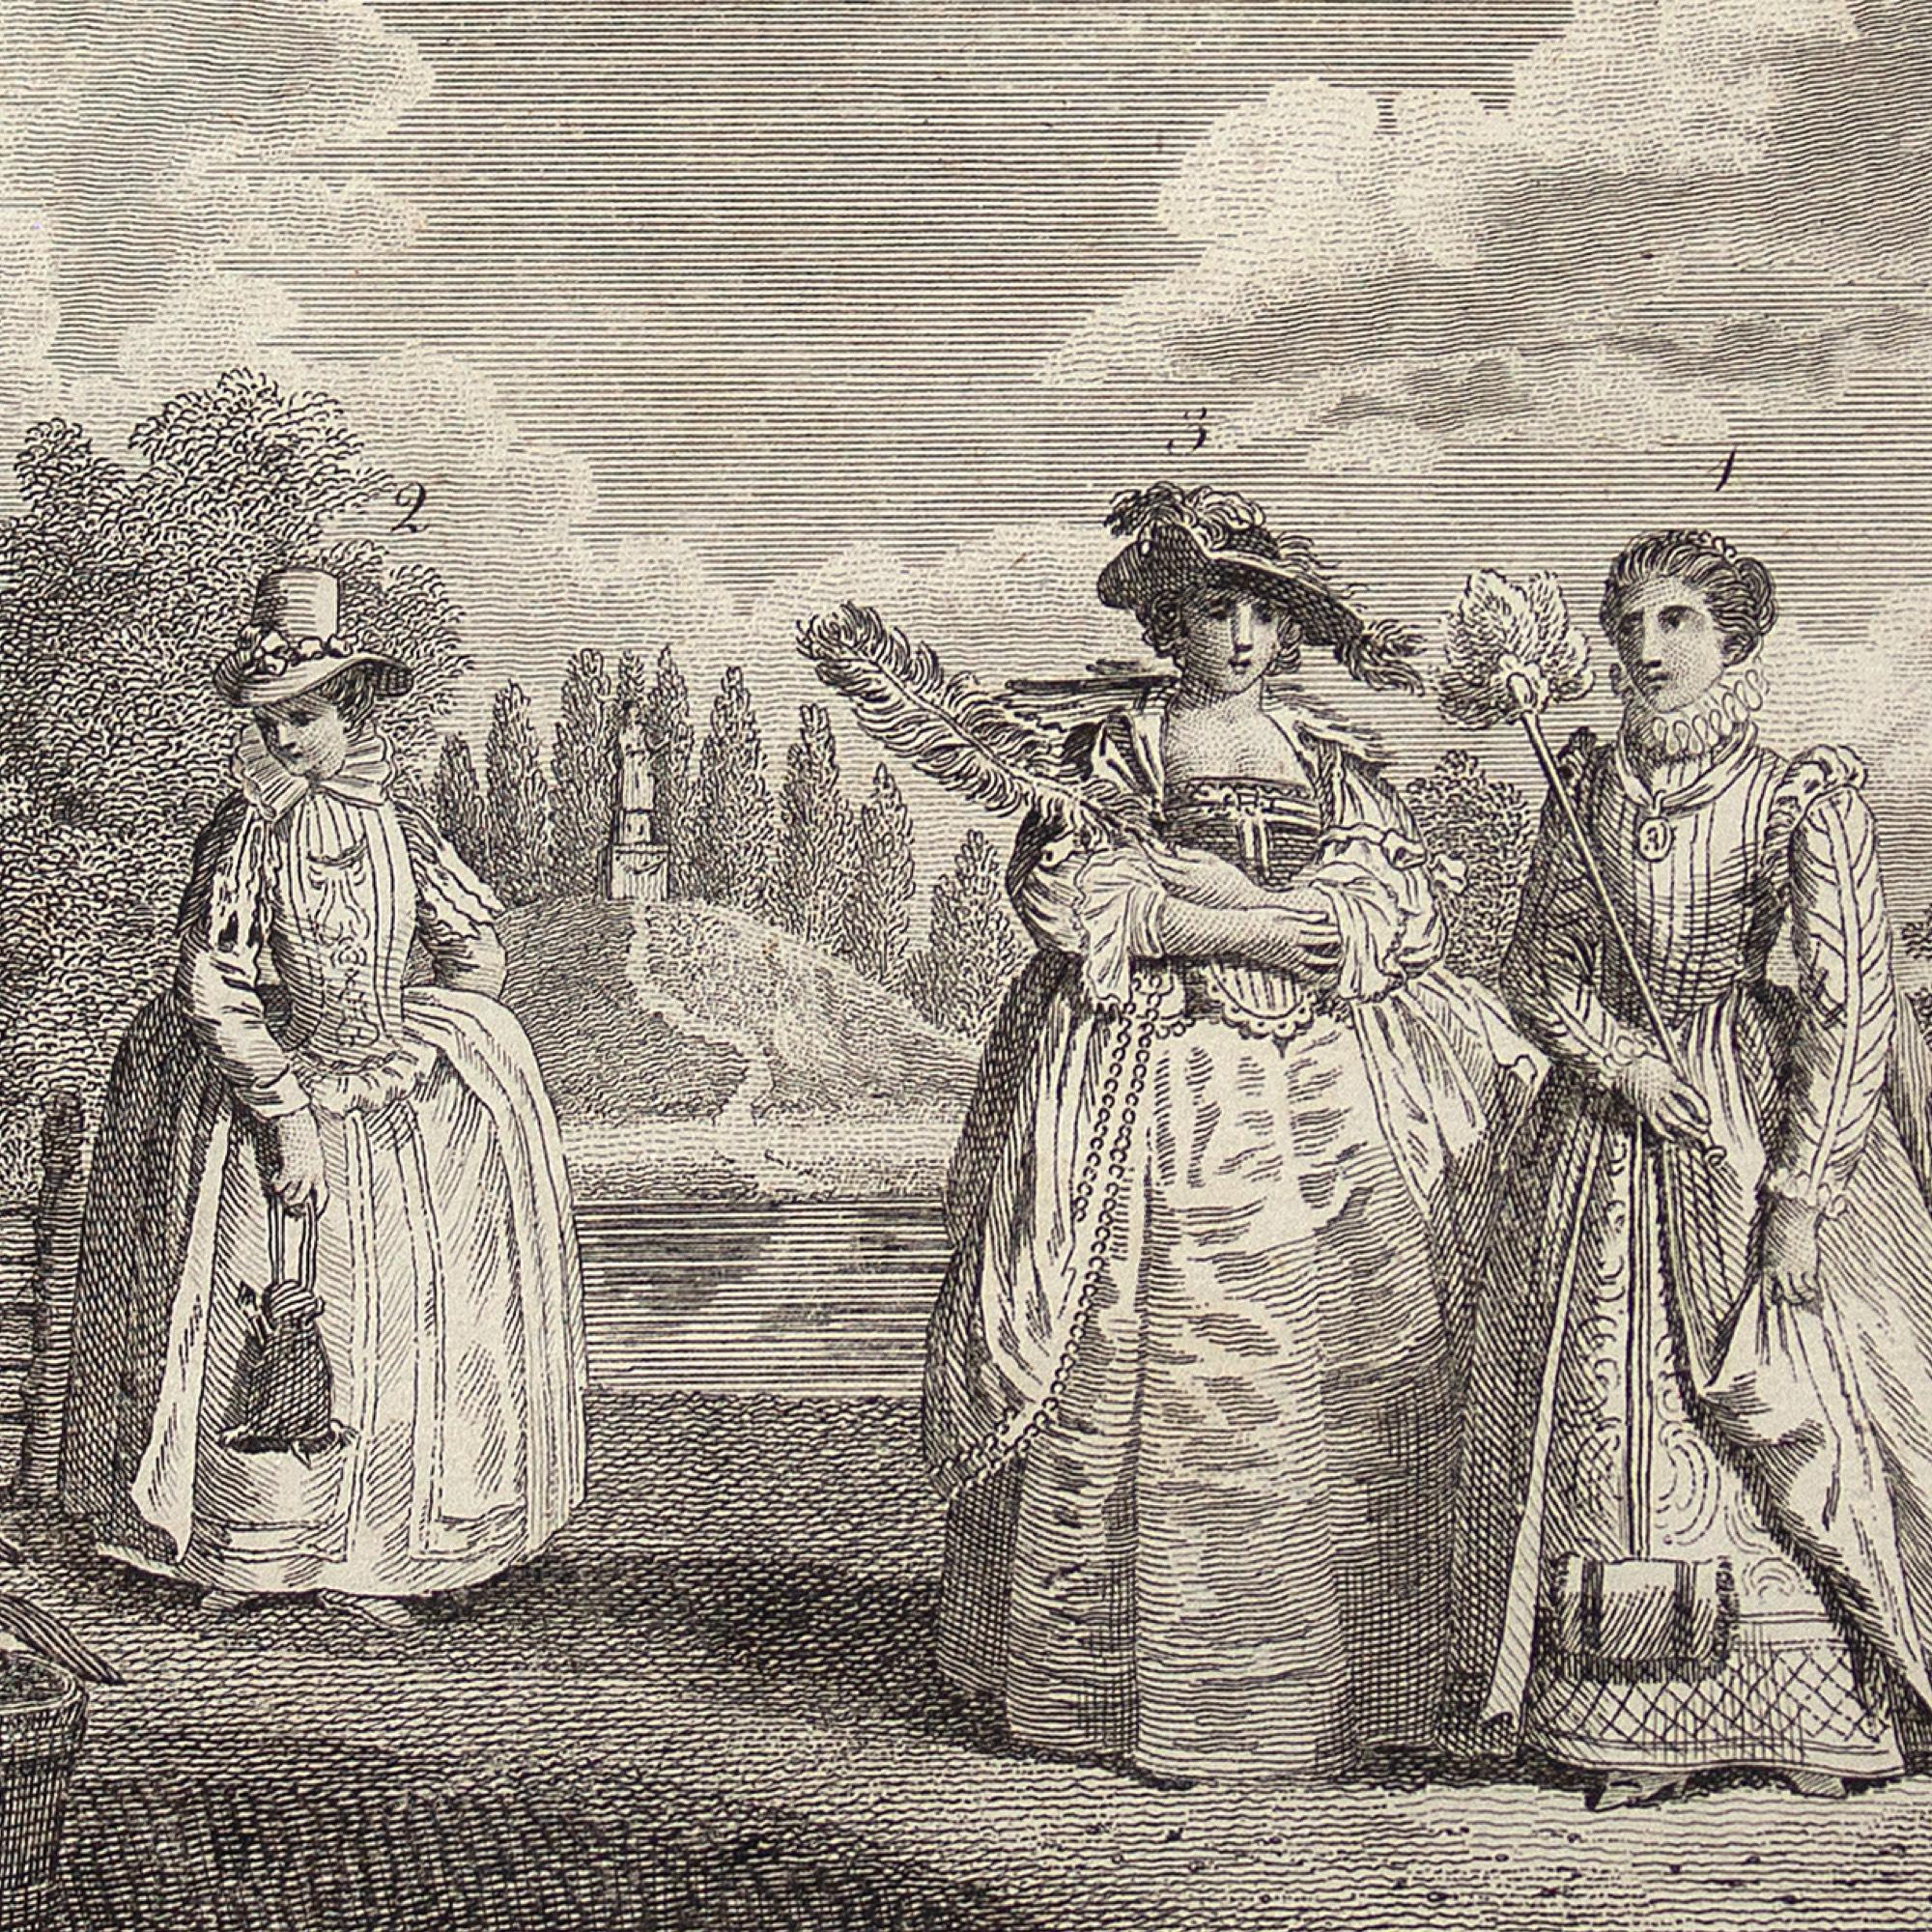 This late 18th-century engraving from Thomas Bankes’ ‘New and Authentic System of Universal Geography’ depicts the evolution of ladies' fashion between 1590 and 1630.

In this unusual gathering of time-sensitive females, we see a representative from